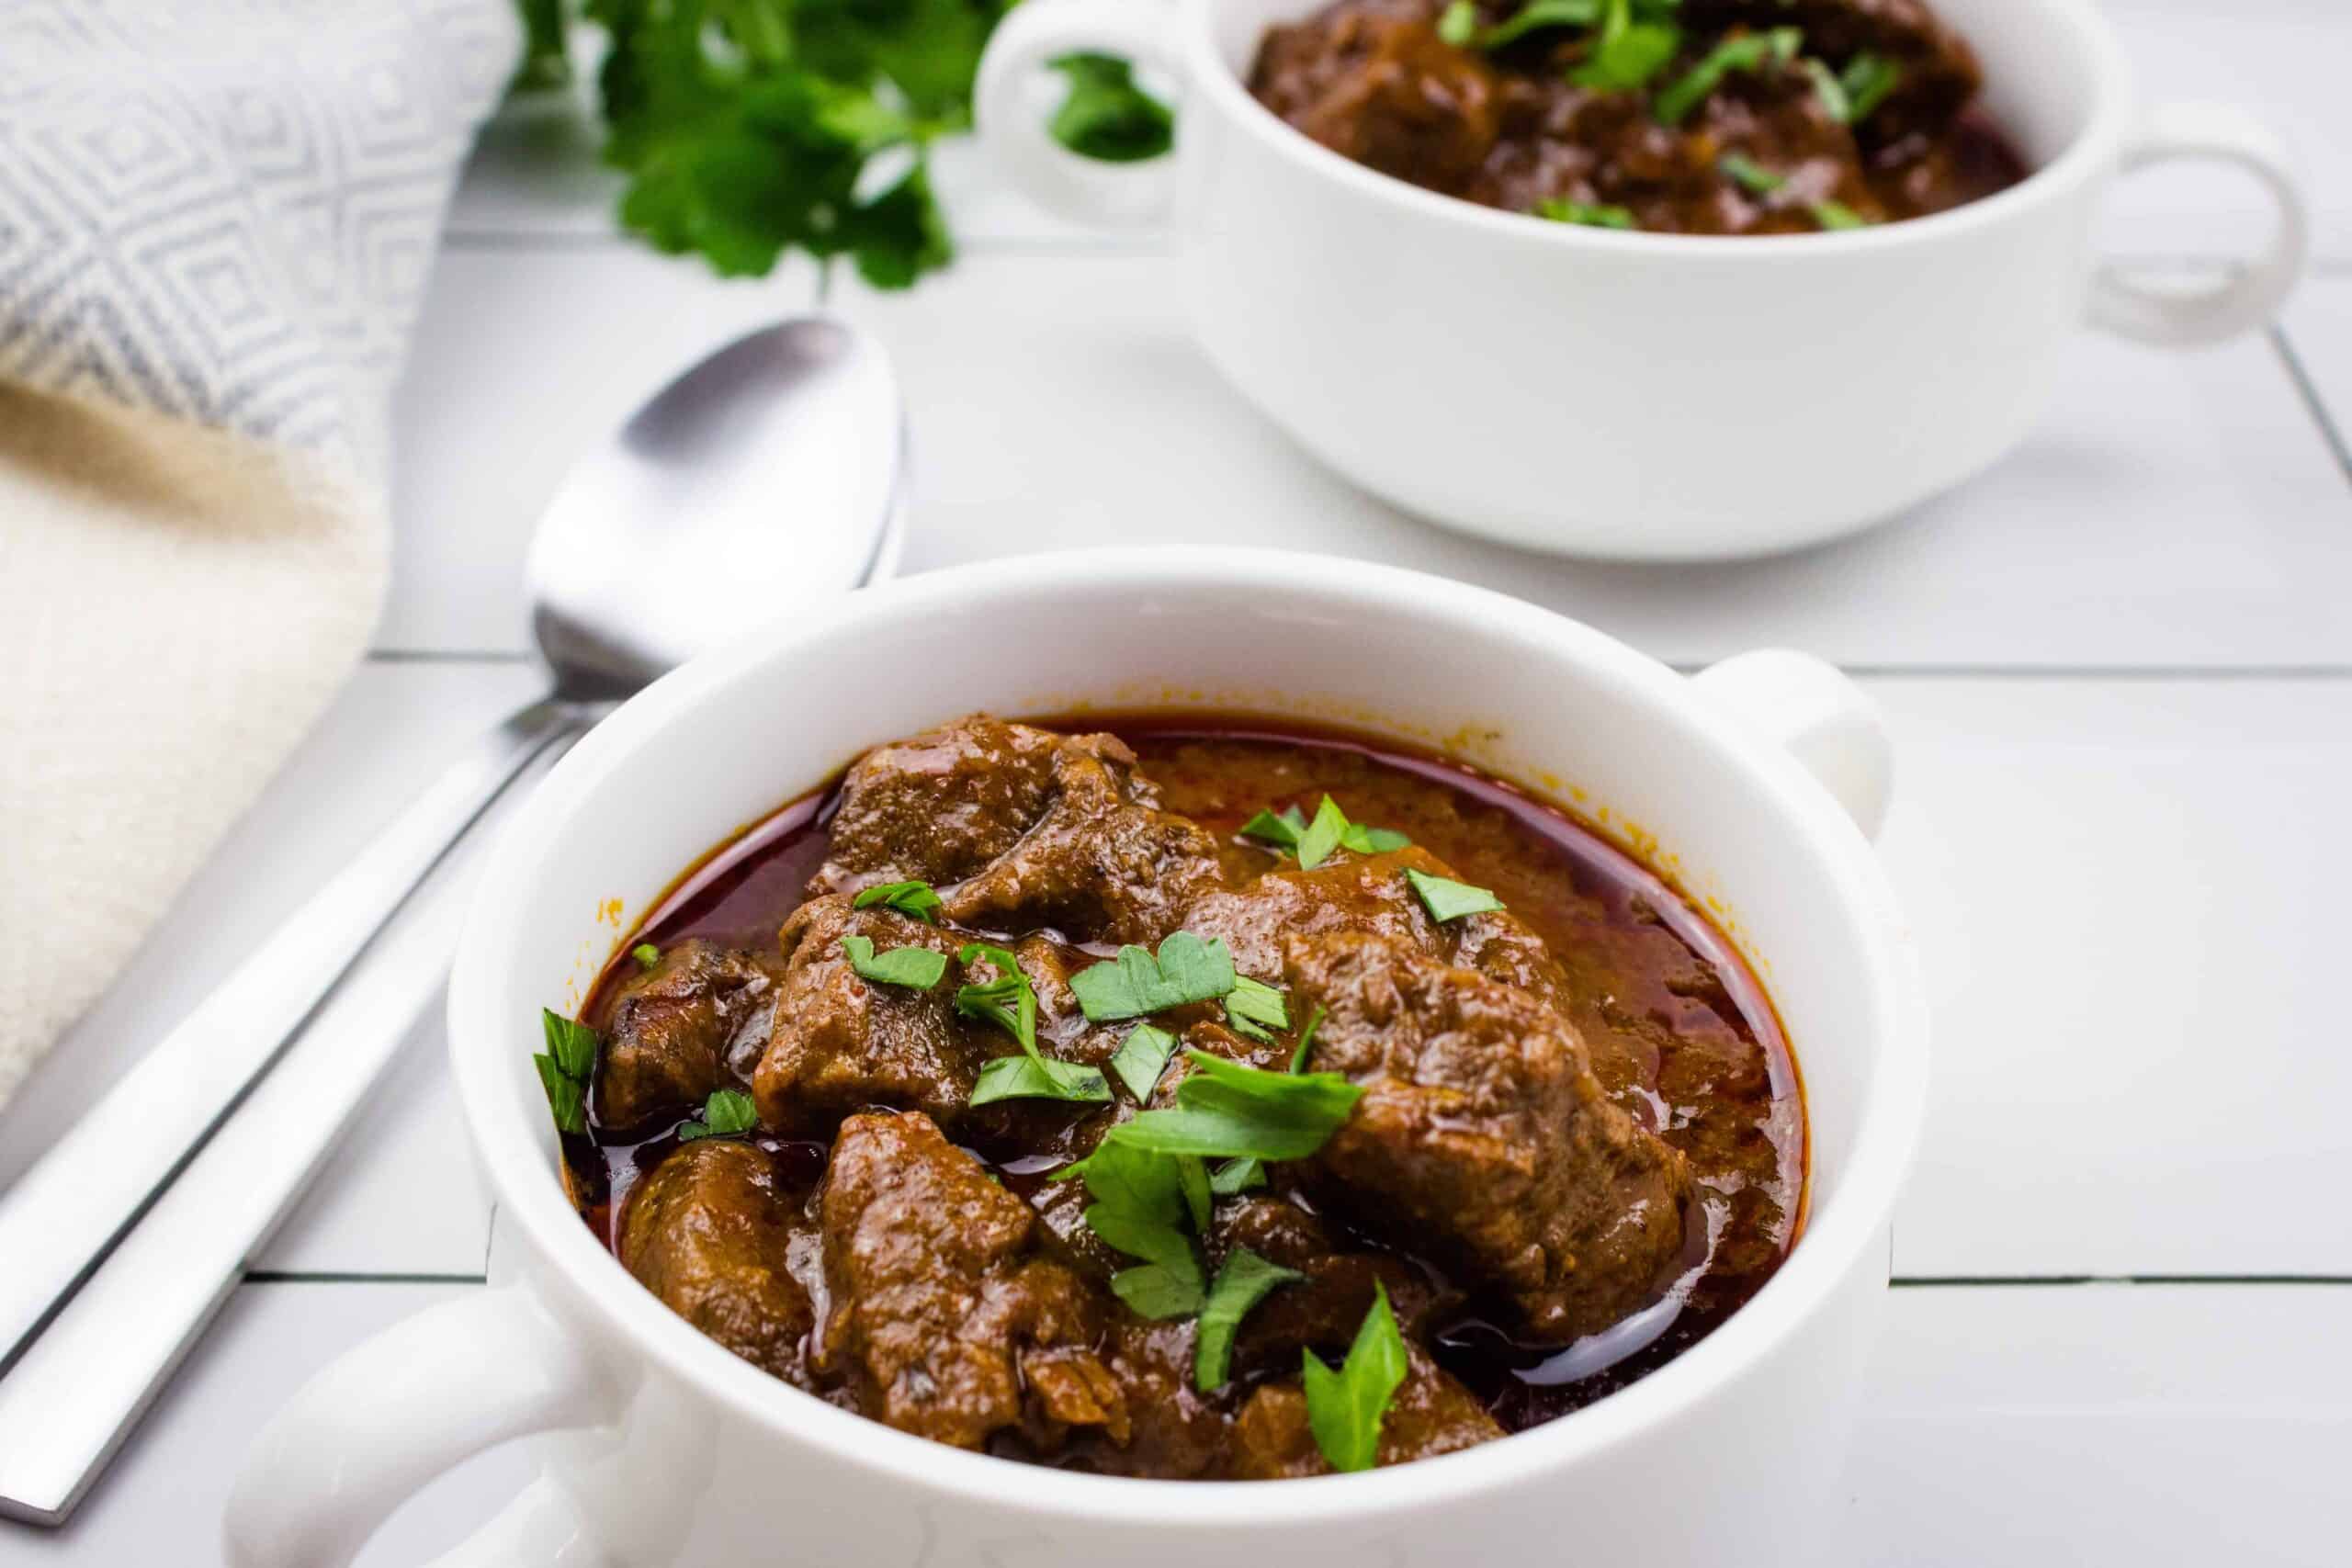 Two delectable bowls of beef stew showcasing a tantalizing blend of flavors, laid out invitingly on a rustic table.